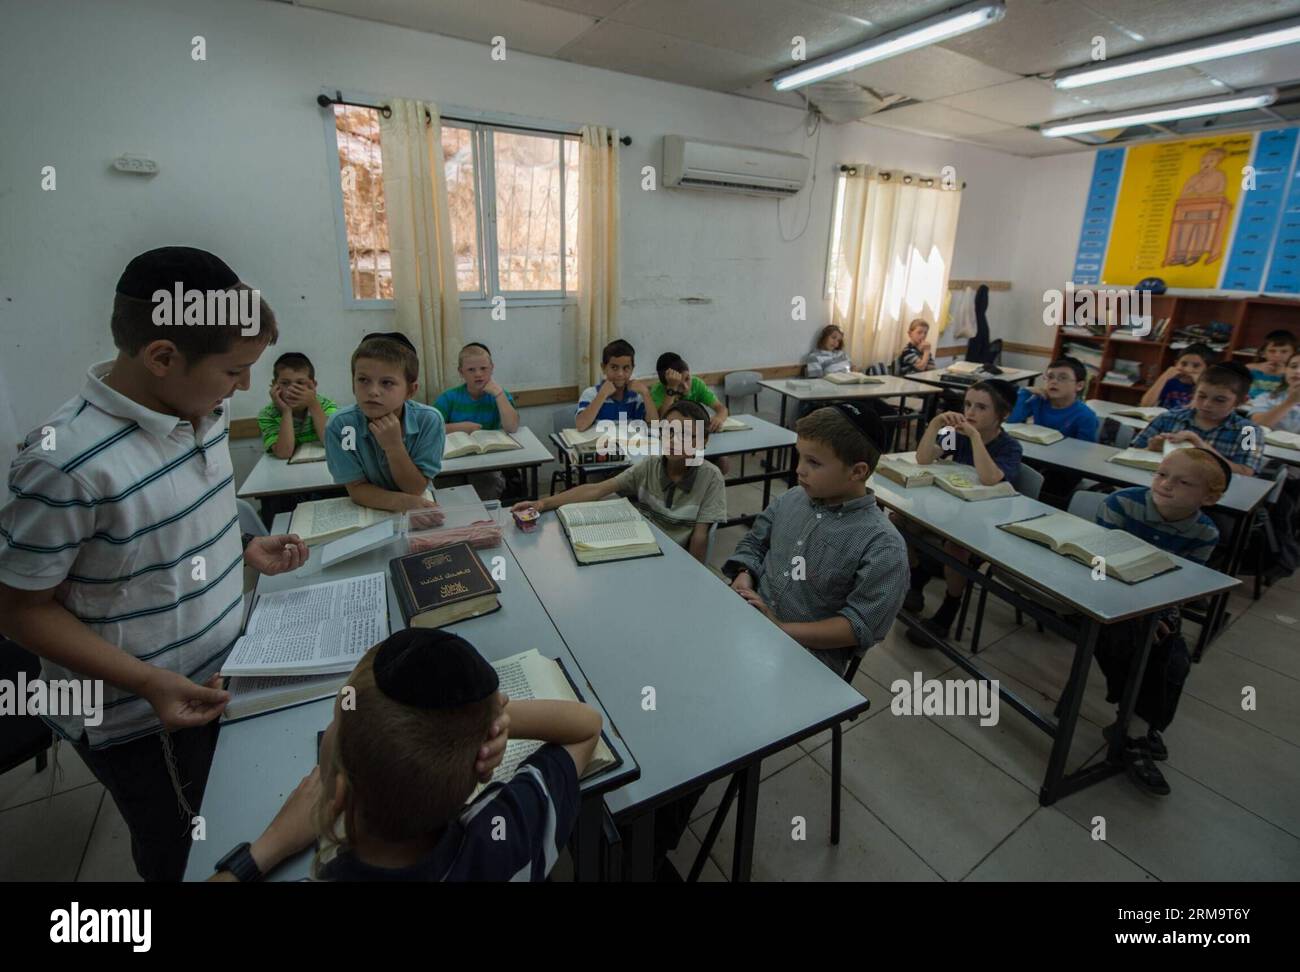 Tzviel Noyman (1st L) leads a class of Jewish religion at Torat Moshe elementary school in Beit Shemesh, about 20 km from Jerusalem, on May 29, 2014. Tzviel Noyman is an Israeli Ultra-Orthodox boy in a family with six children, three boys and three girls. He is ten years old this year and a grade three pupil of Torat Moshe elementary school, which is only opened to Jewish children. Tzviel has eight classes each day, including Hebrew, English, mathematics and Jewish religion, which has four classes each day including Talmud, Mishnah and Gemara. Tzviel likes the religion class best because he th Stock Photo